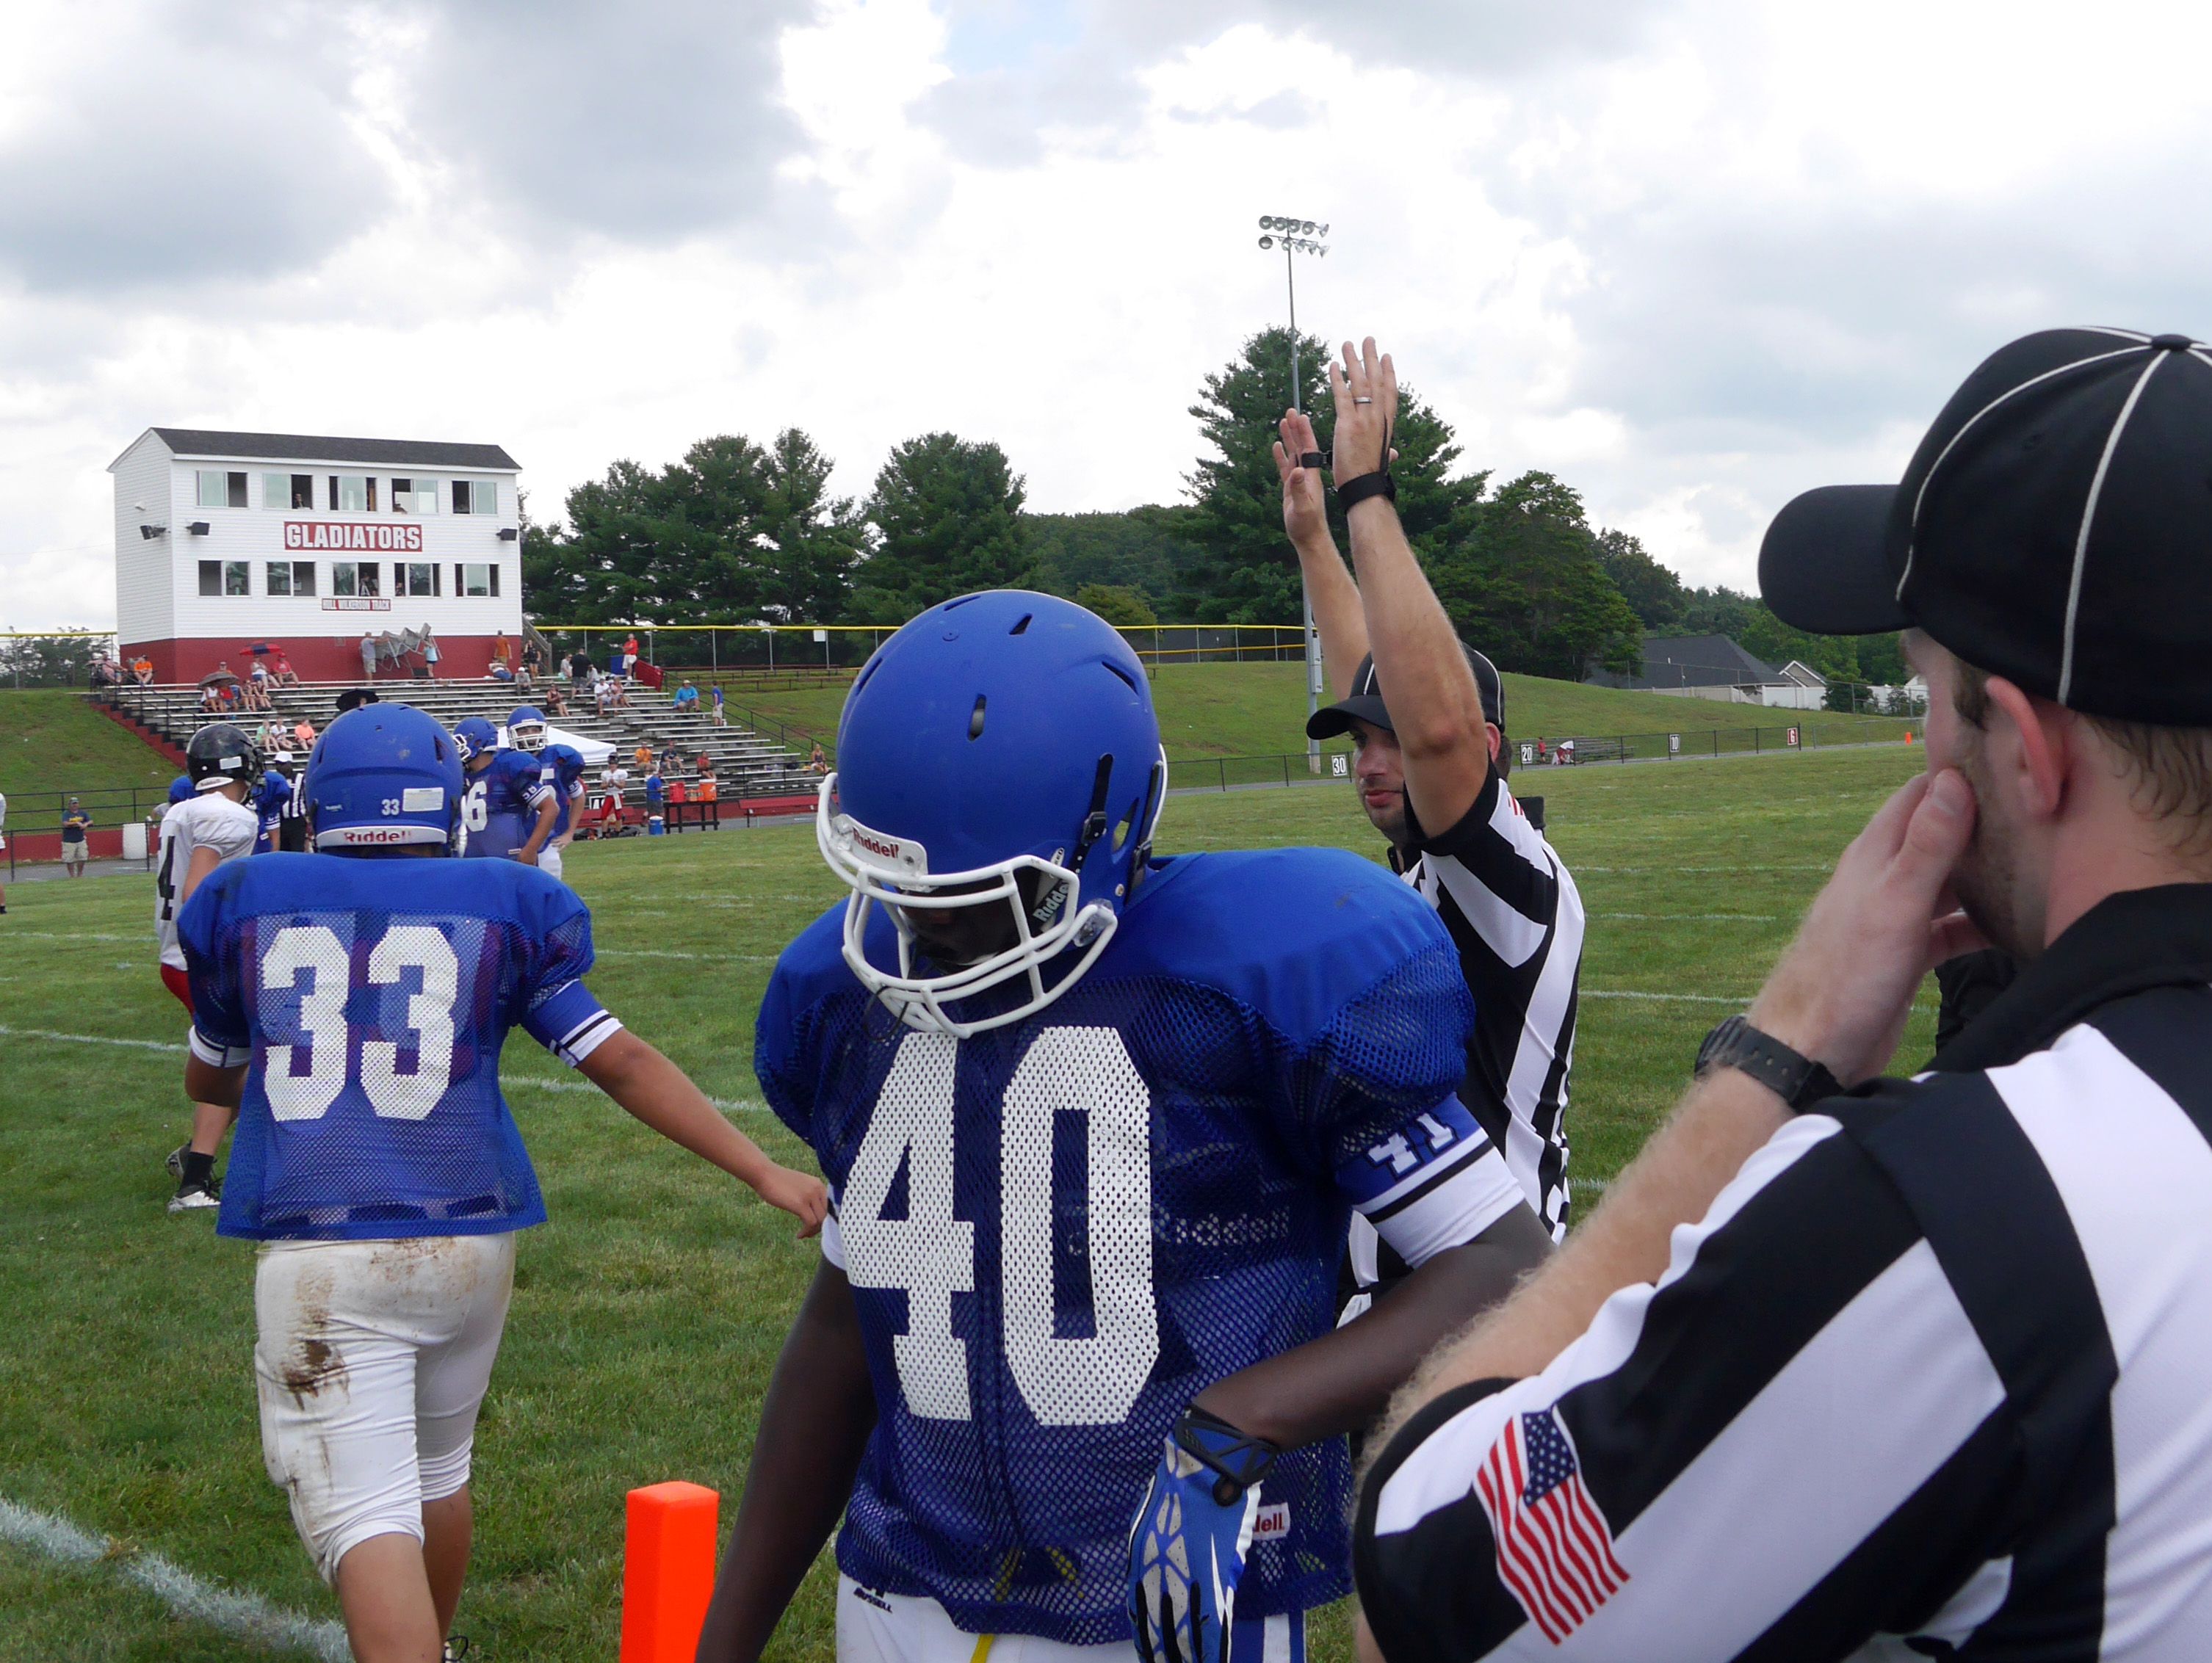 Second-year referee Eric Trynovich of Waynesboro signals a touchdown for James River against Fort Defiance as first-year referee Daniel Roquemore of Staunton watches during the Riverheads High School 2016 football jamboree on Aug. 20, 2016.